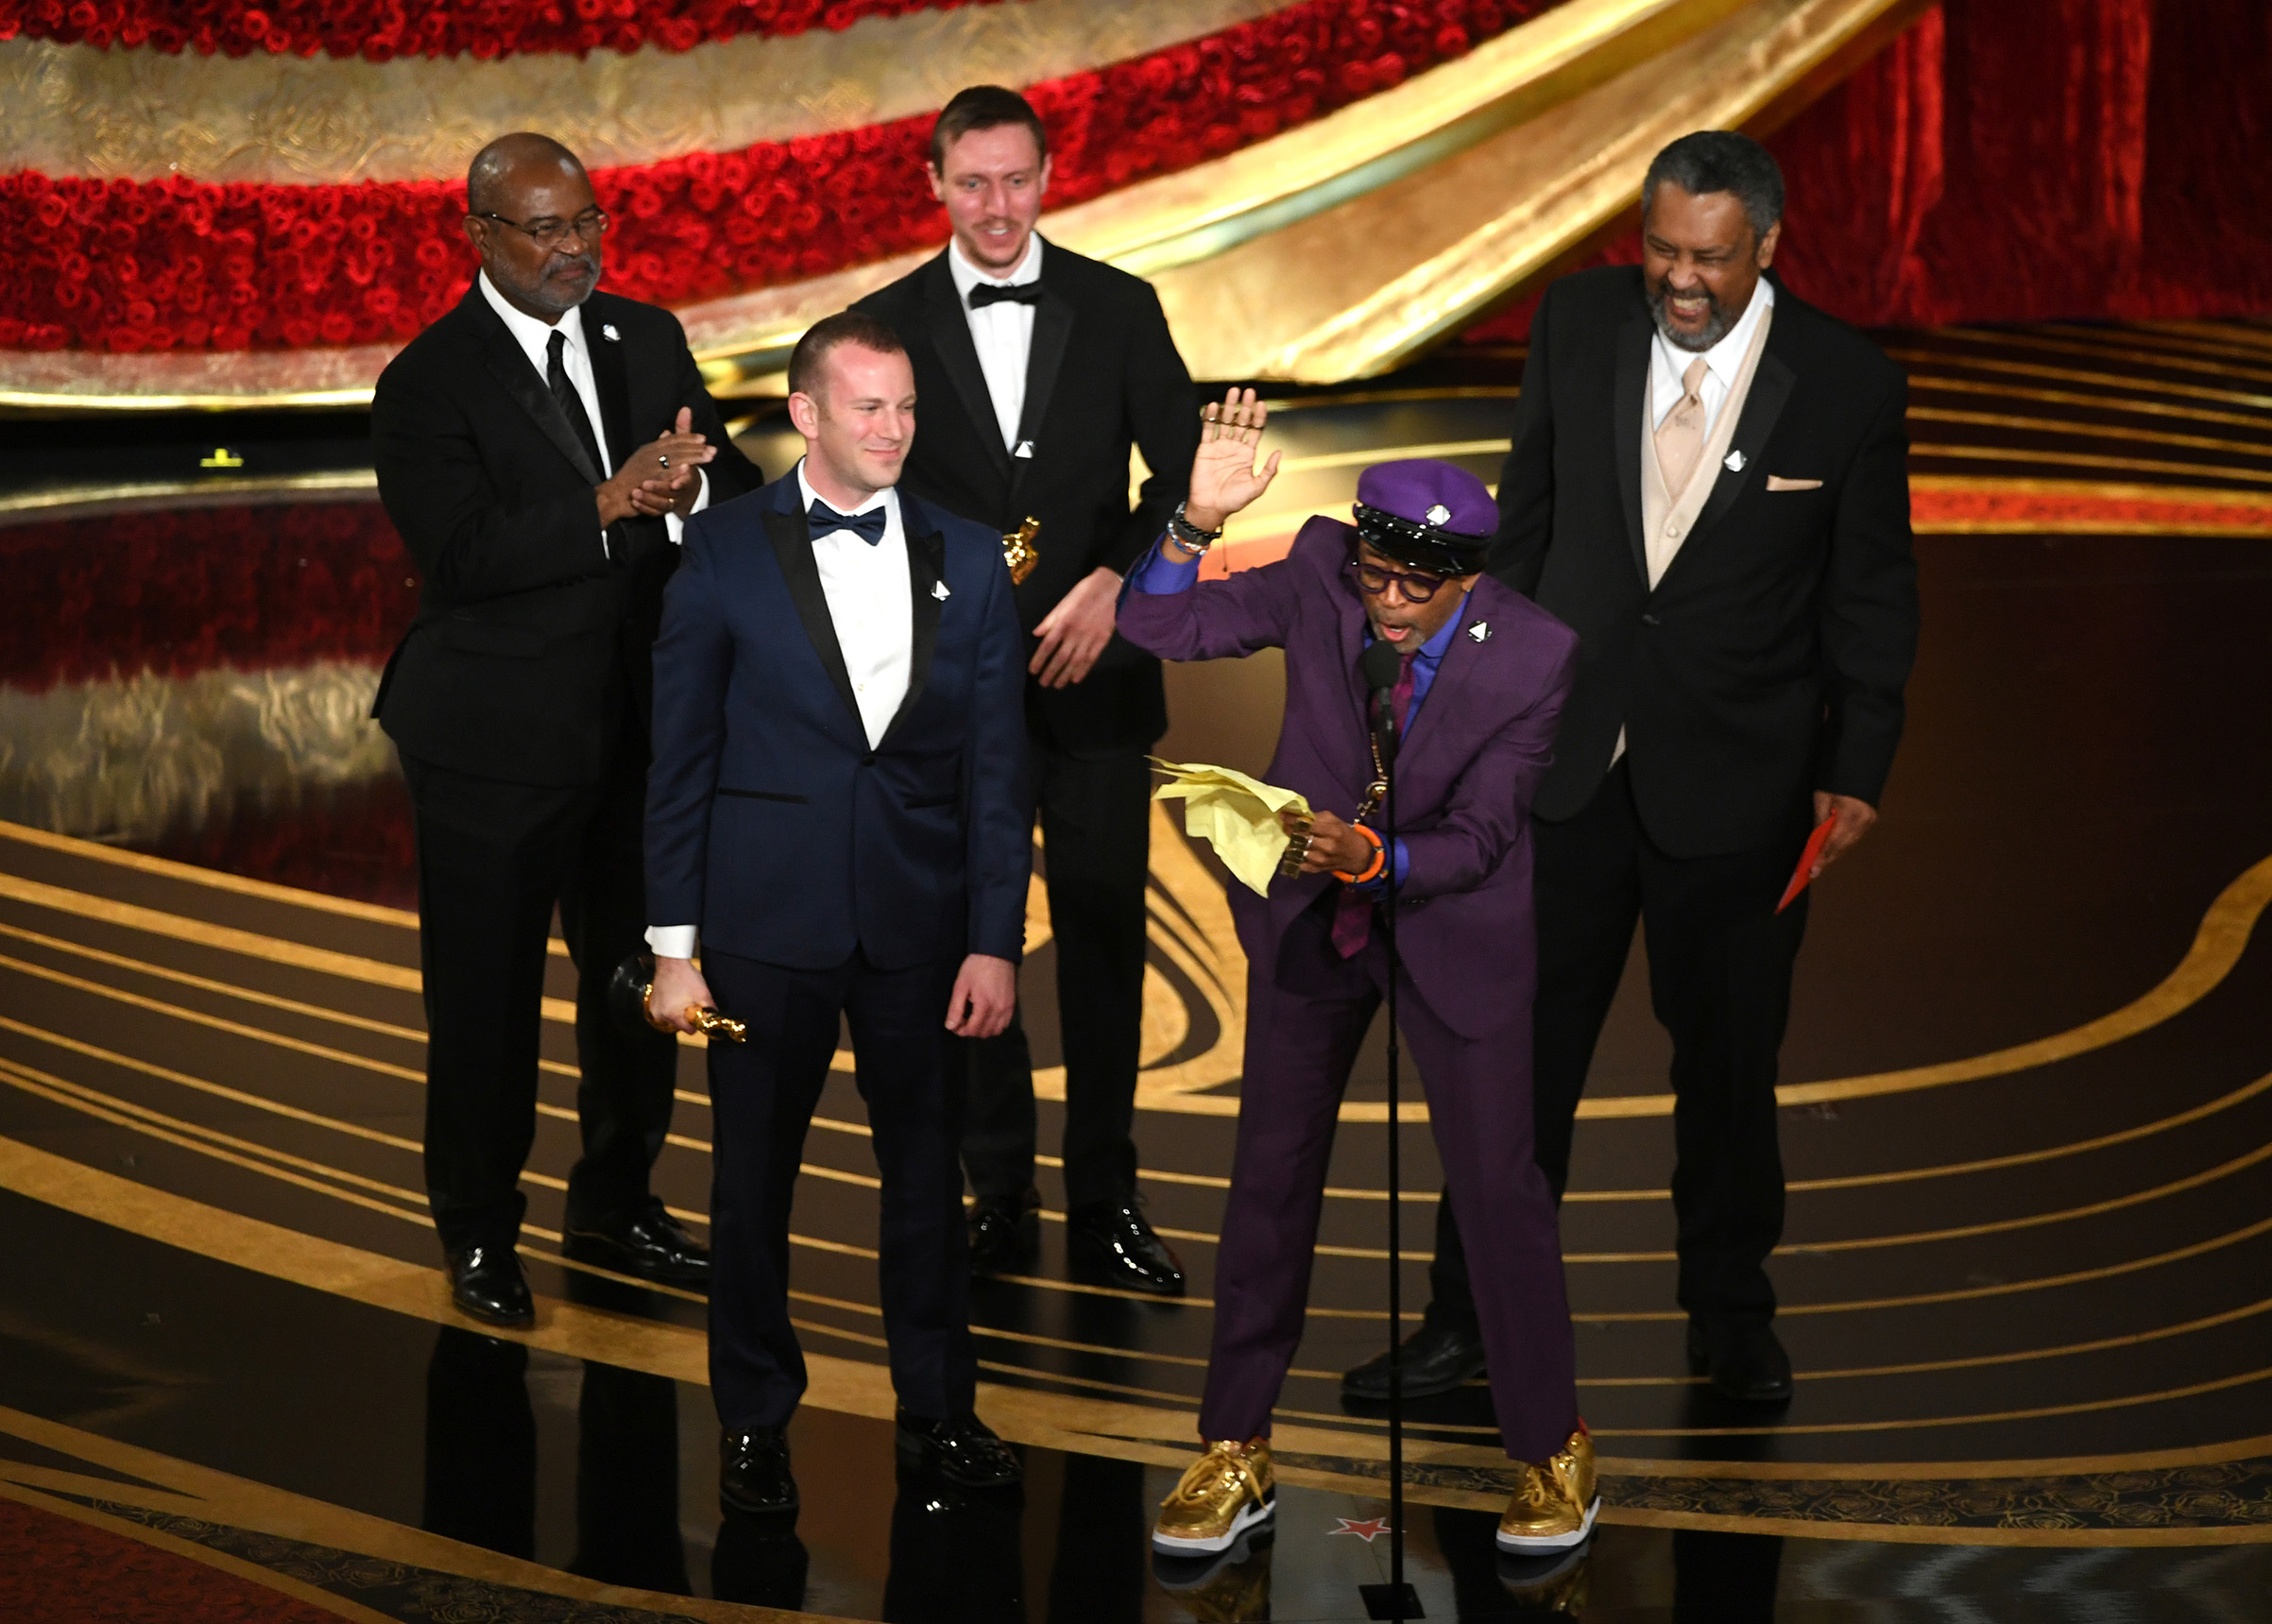 Spike Lee, David Rabinowitz , Kevin Willmott and Charlie Wachtel accept the Best Adapted Screenplay award for "BlacKkKlansman" onstage during the 91st Annual Academy Awards at Dolby Theatre on Feb. 24, 2019. (Kevin Winter—Getty Images)